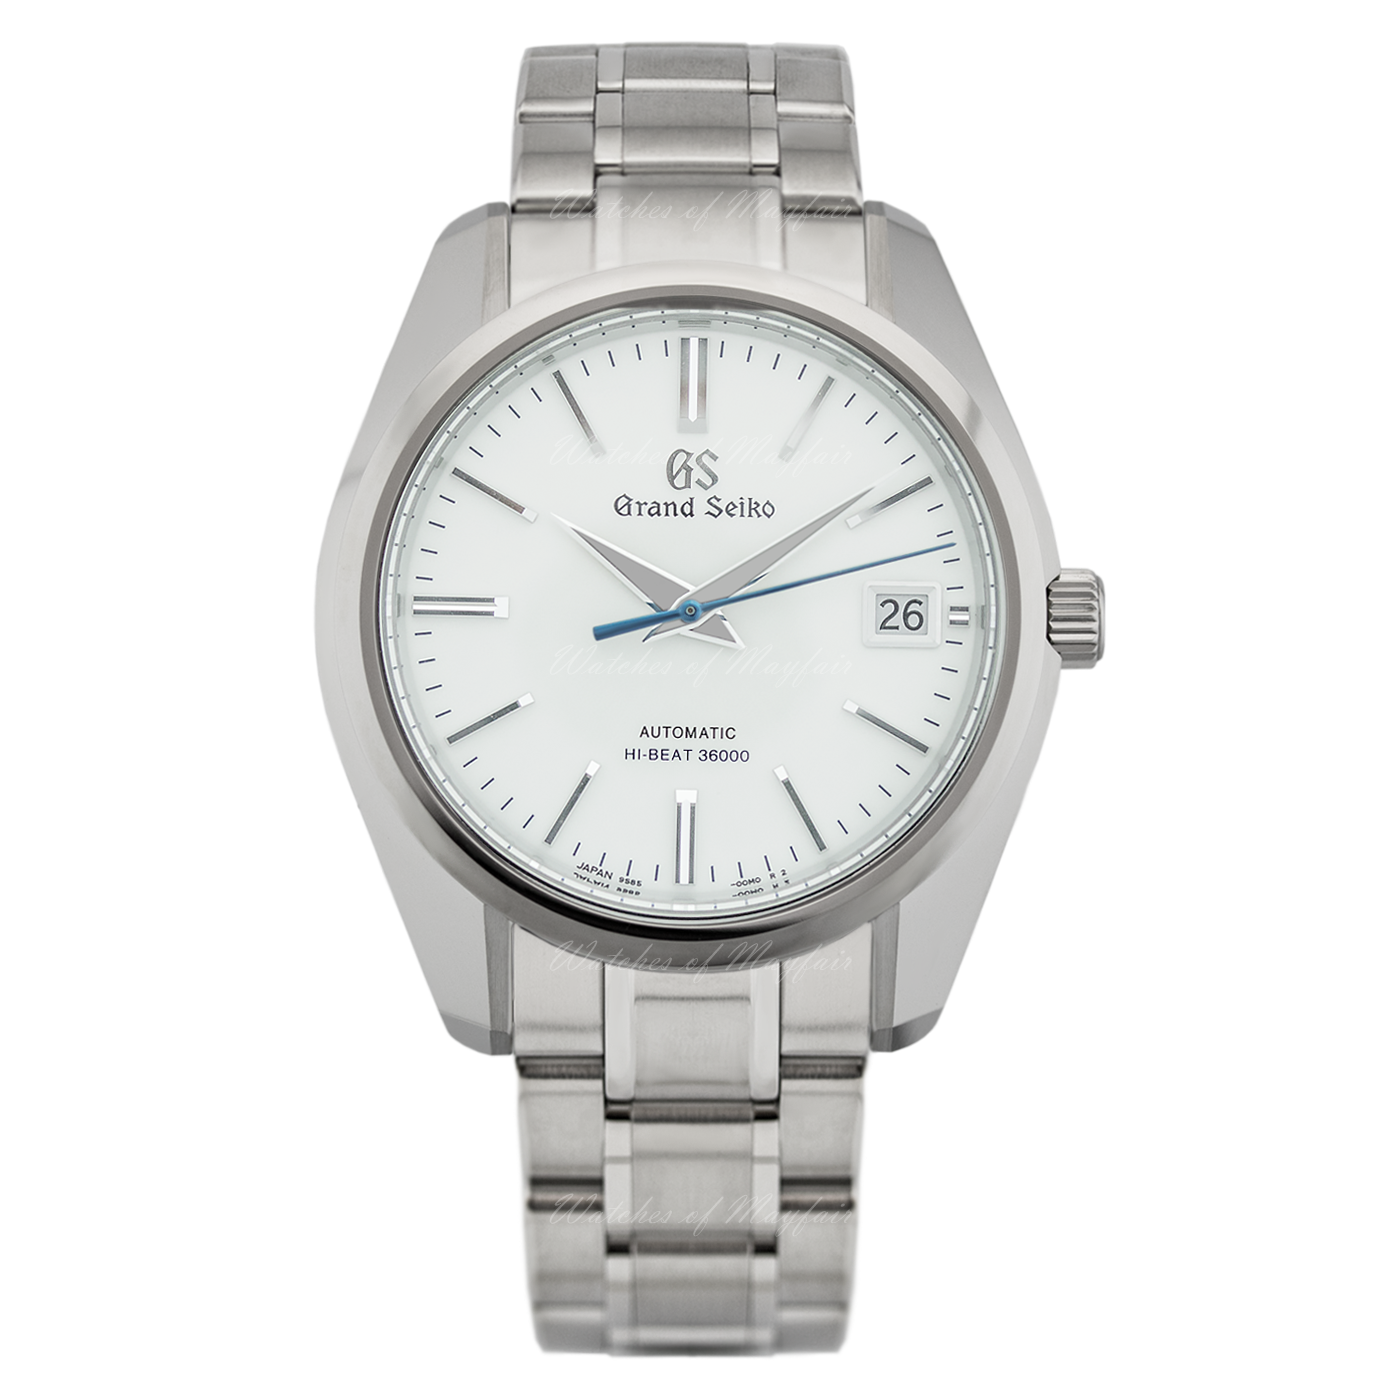 SBGH201 |Grand Seiko Heritage Hi-Beat 36000  watch. Buy Now Watches  of Mayfair